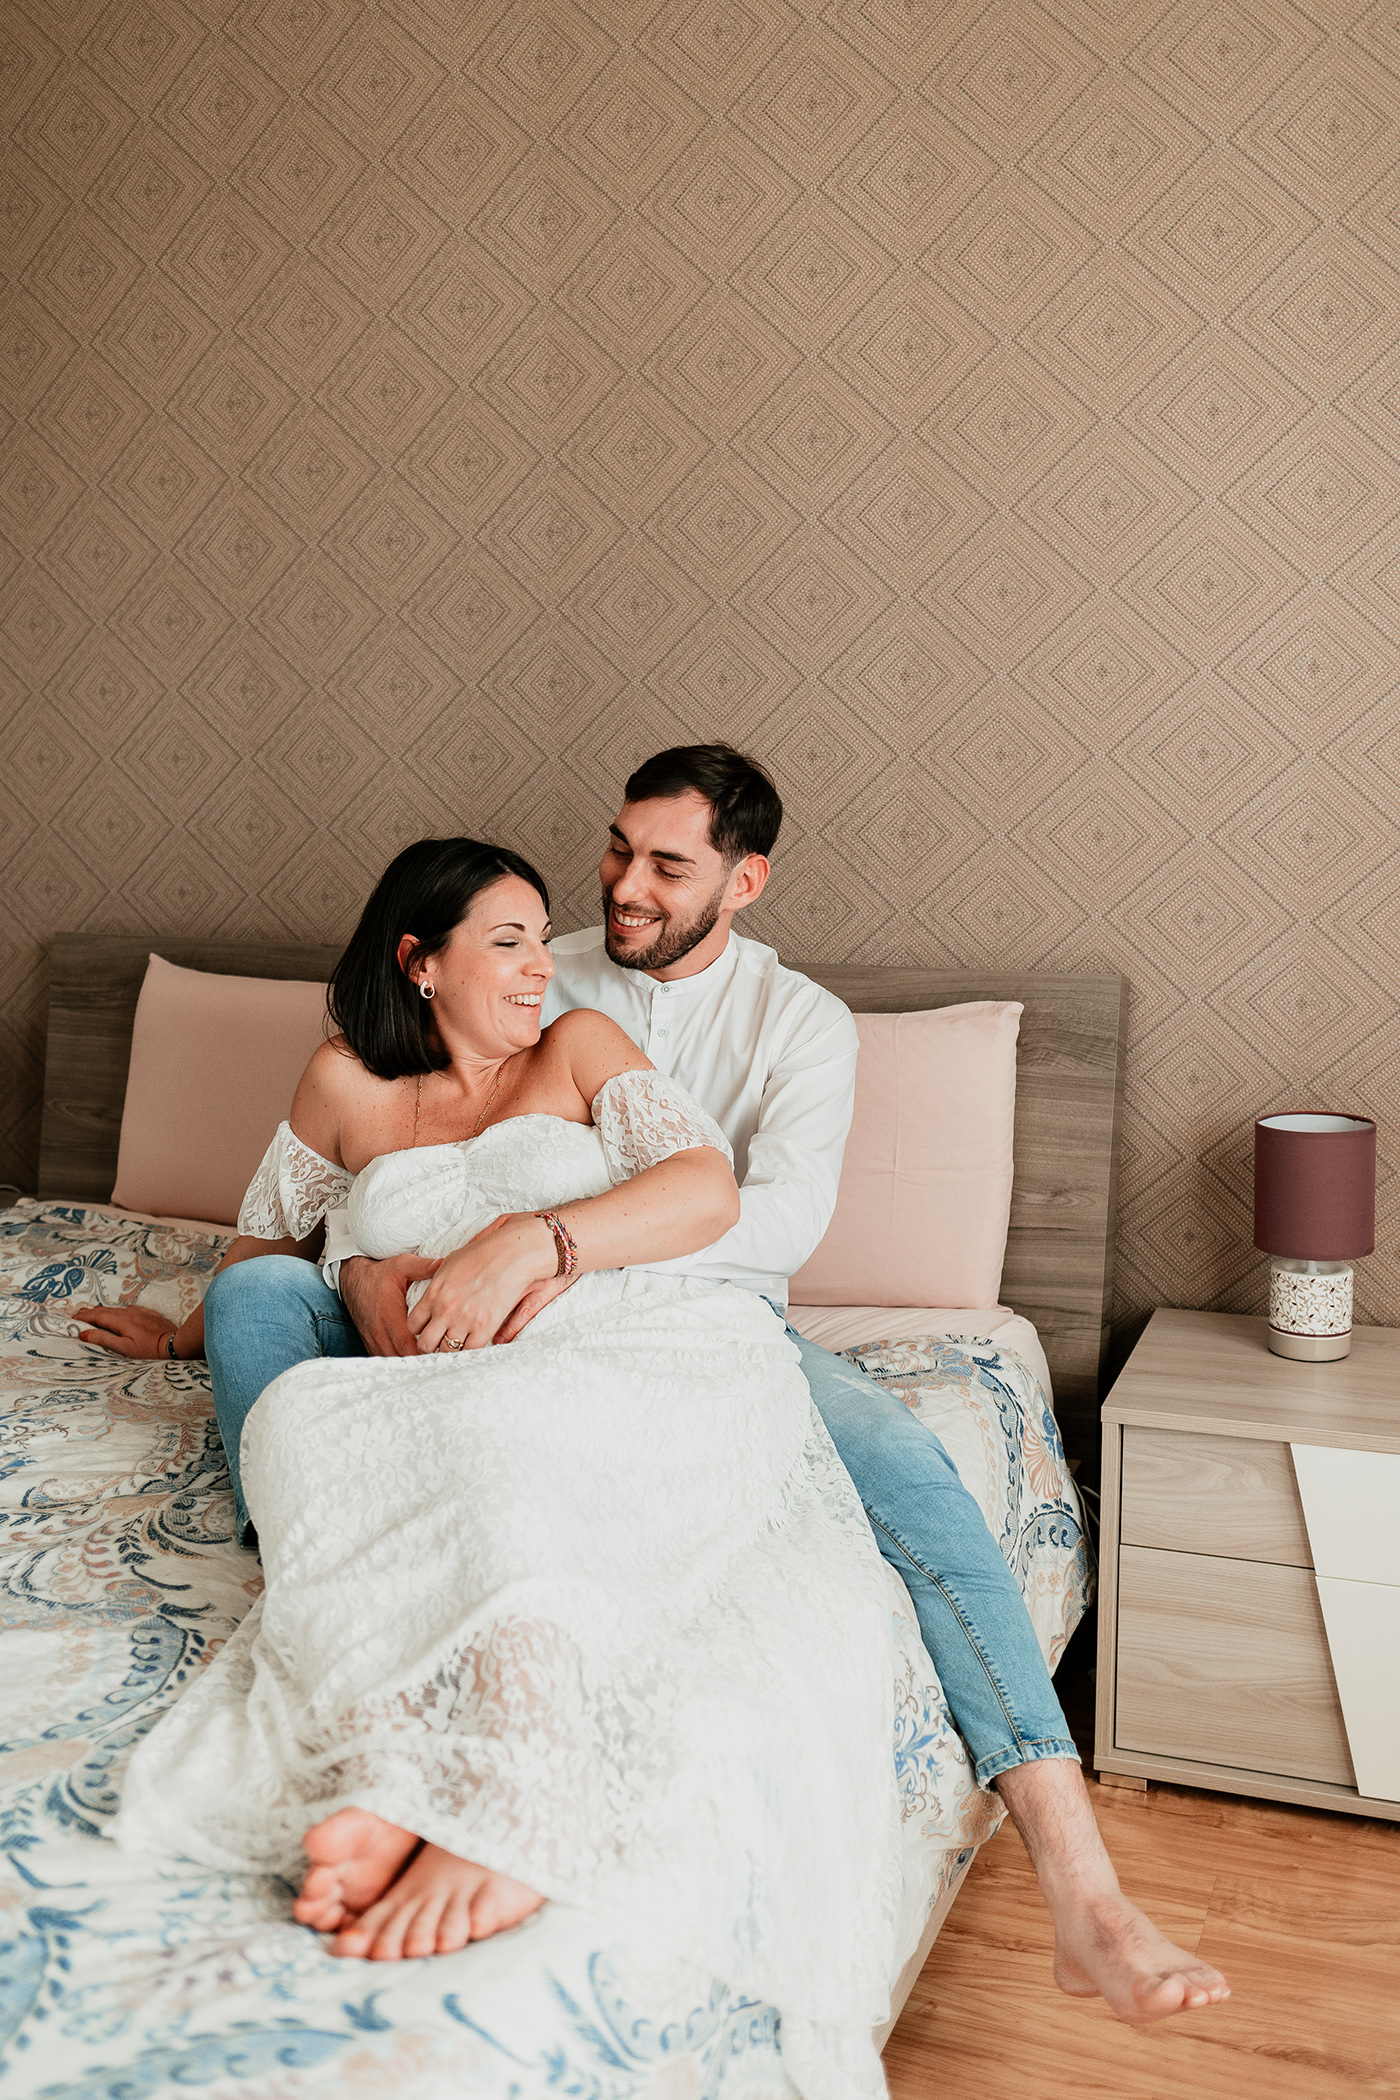 MaternitySession pregnancy photography pregnant woman Intimate couplesession couple shooting intimate shooting intimatematernity maternityphotography maternityshooting